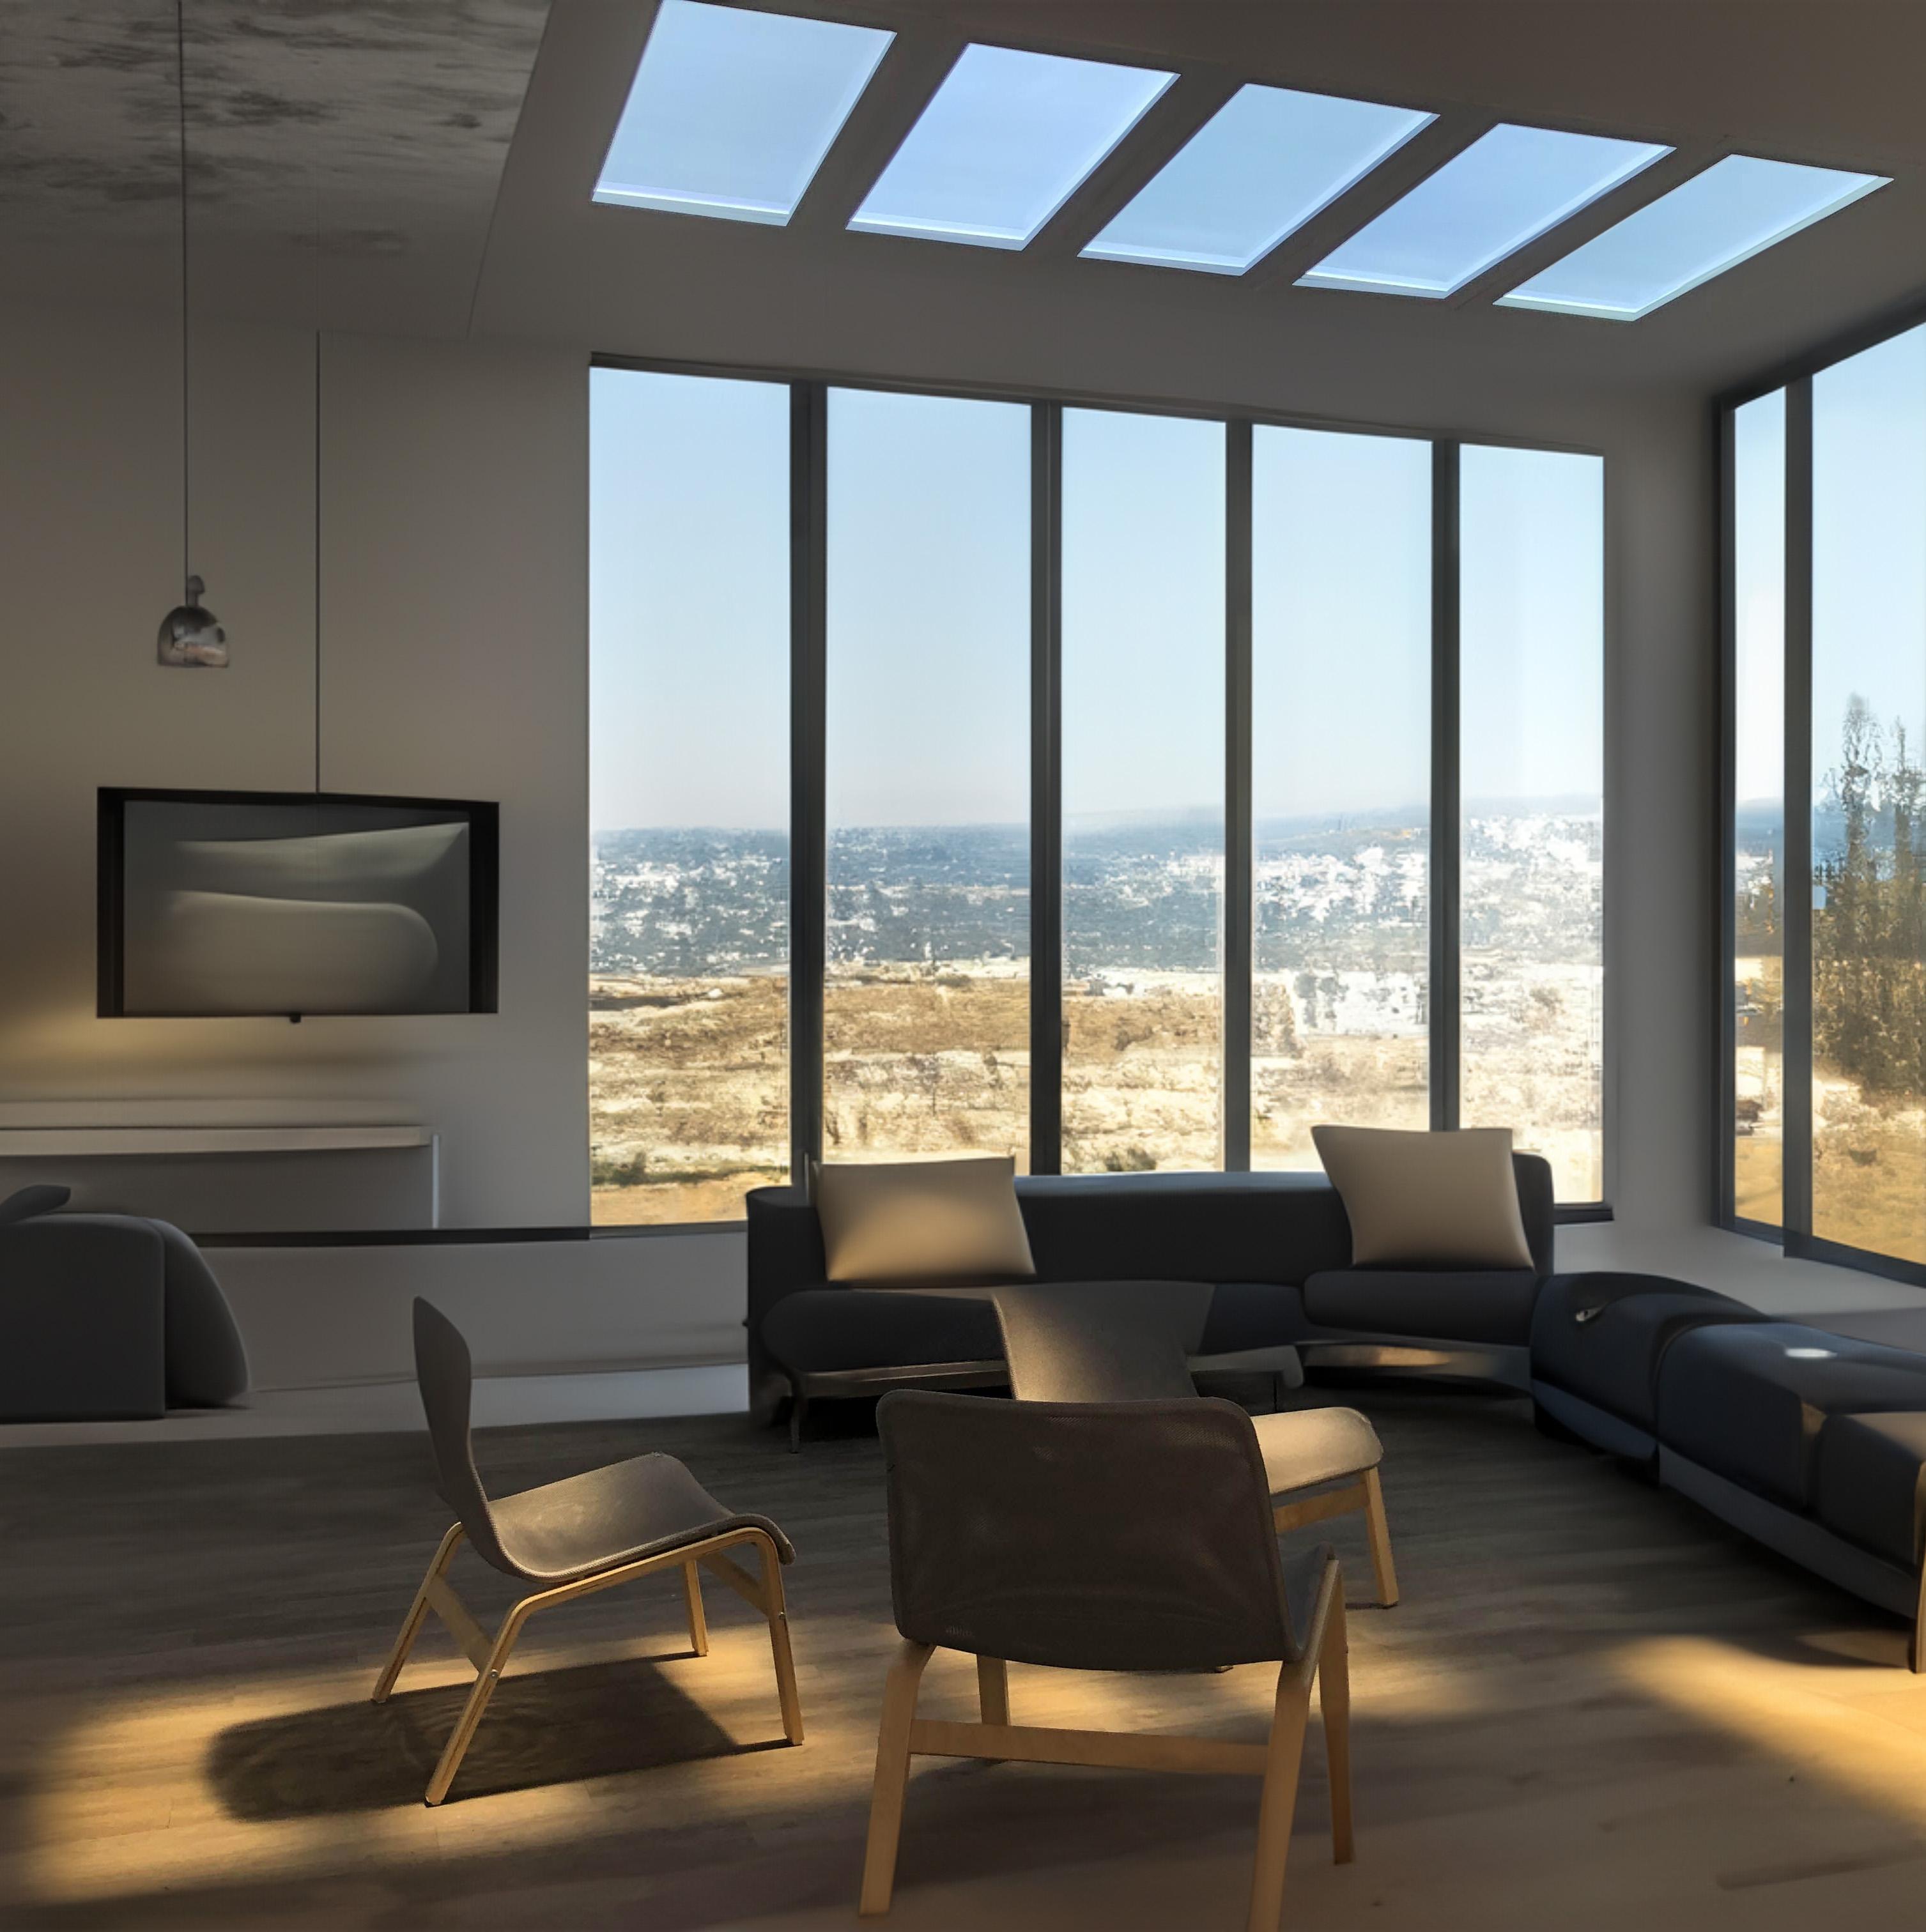 Innerscene Virtual Sun displayed in calm home office space